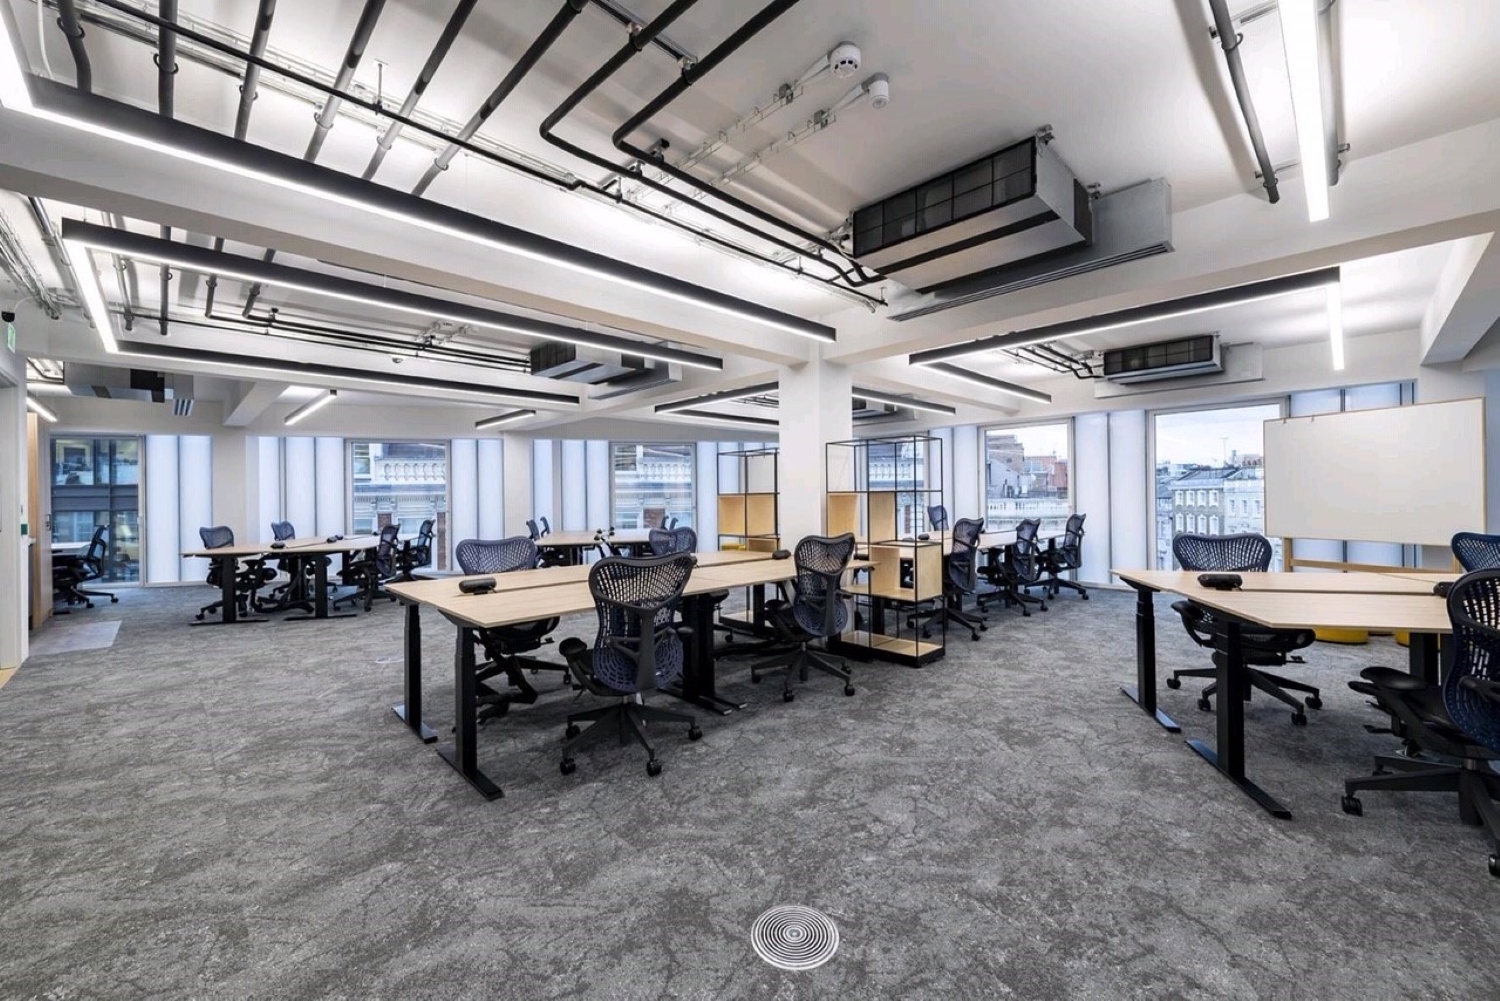 Plateau Carpet Tiles and example of choosing the best flooring for a business